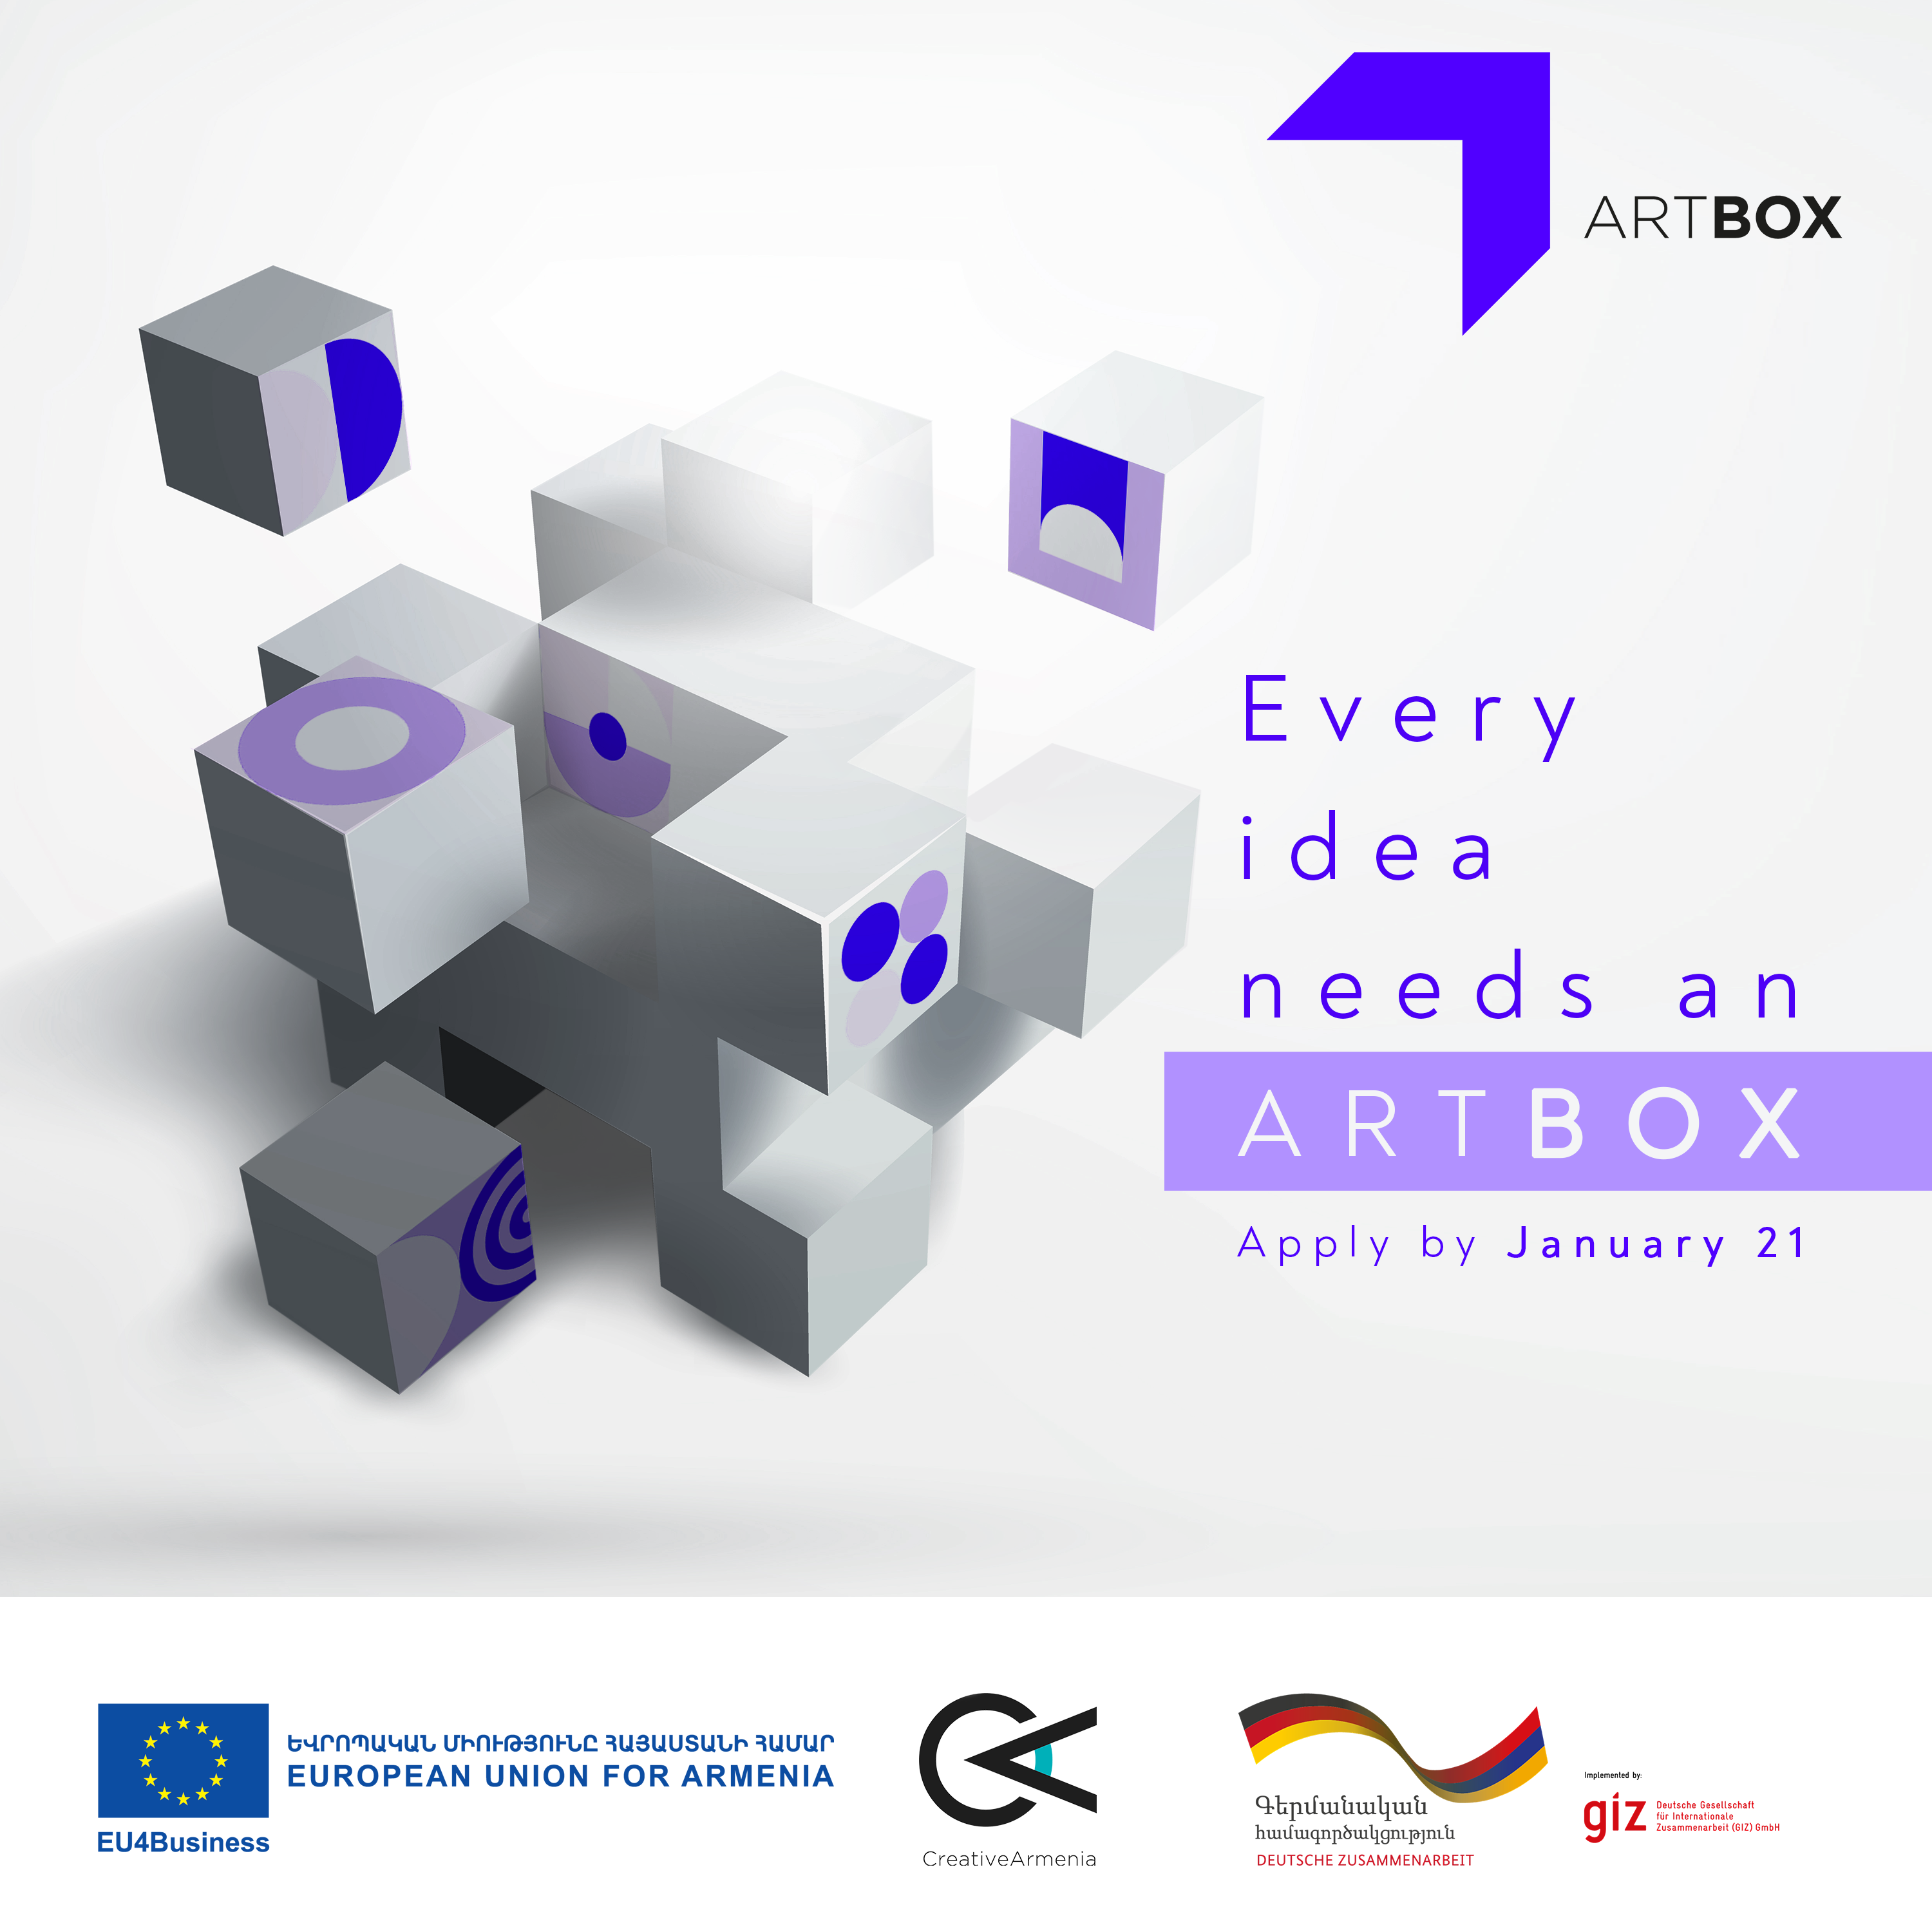 Creative incubator Artbox will develop projects across all art fields and bring them to investors - Armenian Weekly